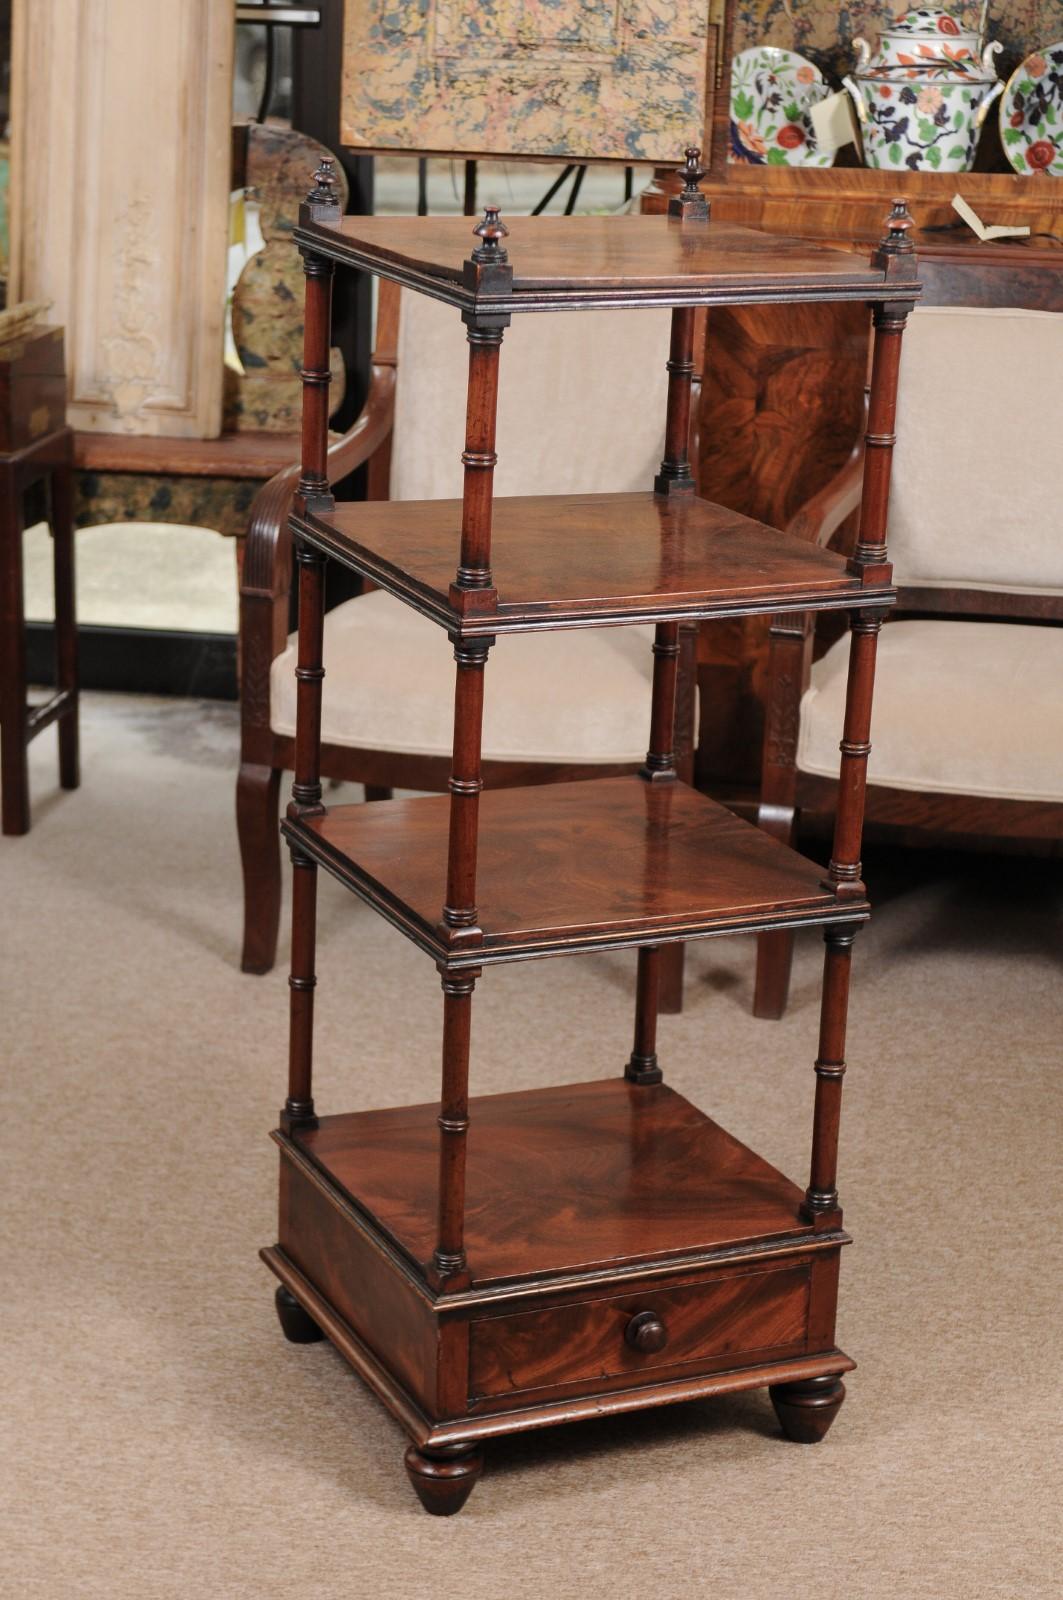 Mahogany 4-tier etagere with lower drawer and turned feet, 19th century continental.